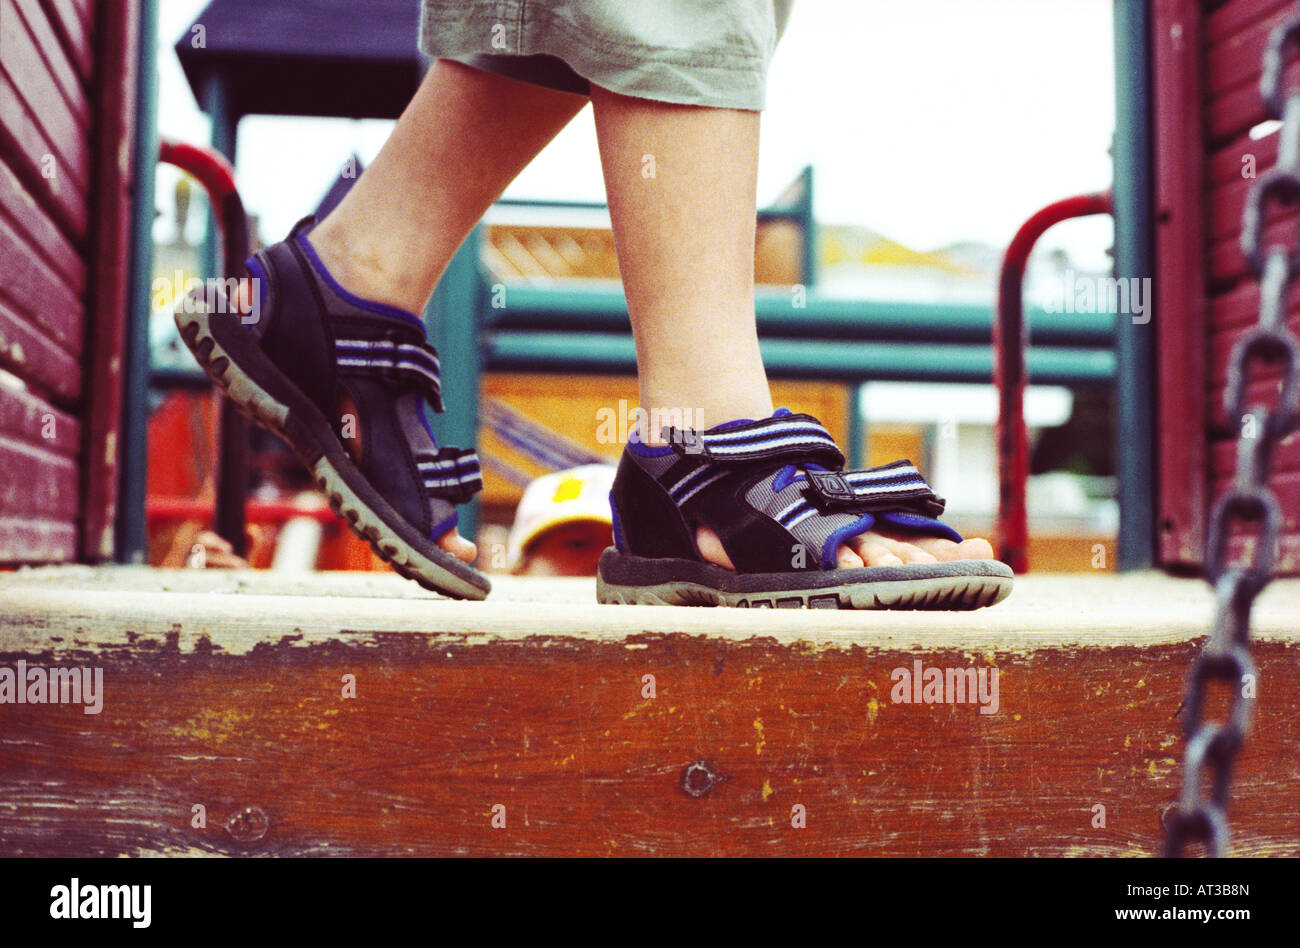 A child on a climbing frame, close-up of feet Stock Photo